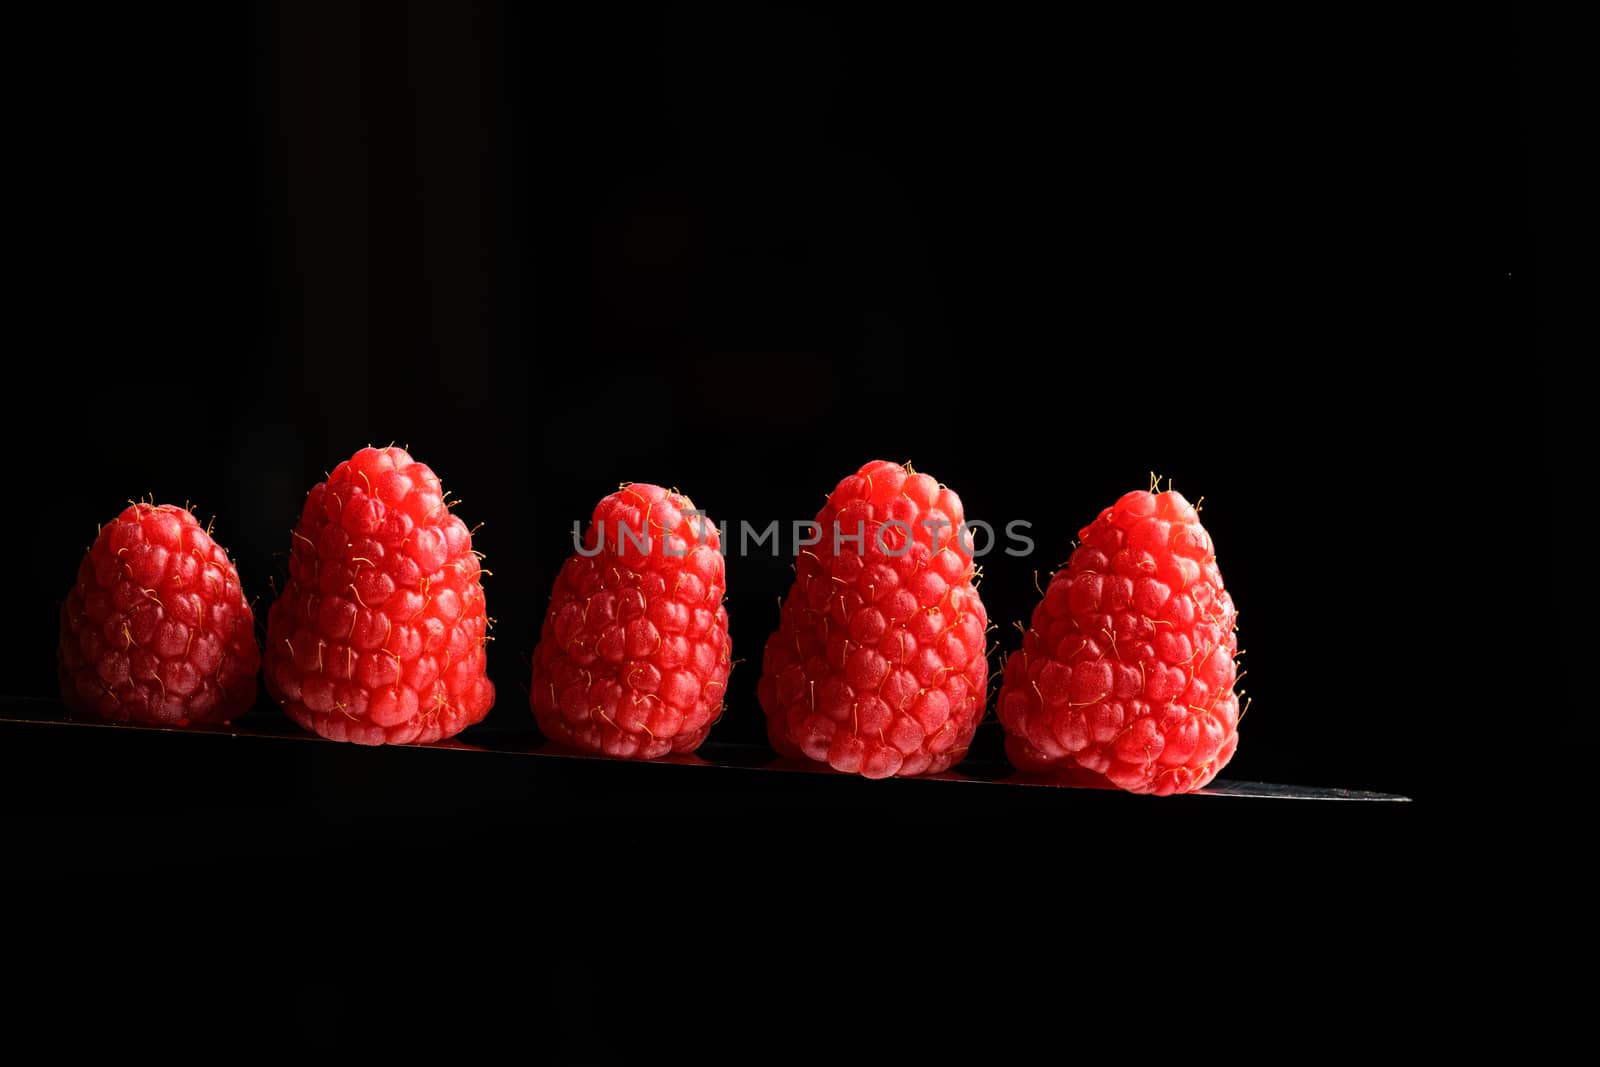 Red Berries balancing on a knife blade with a black background